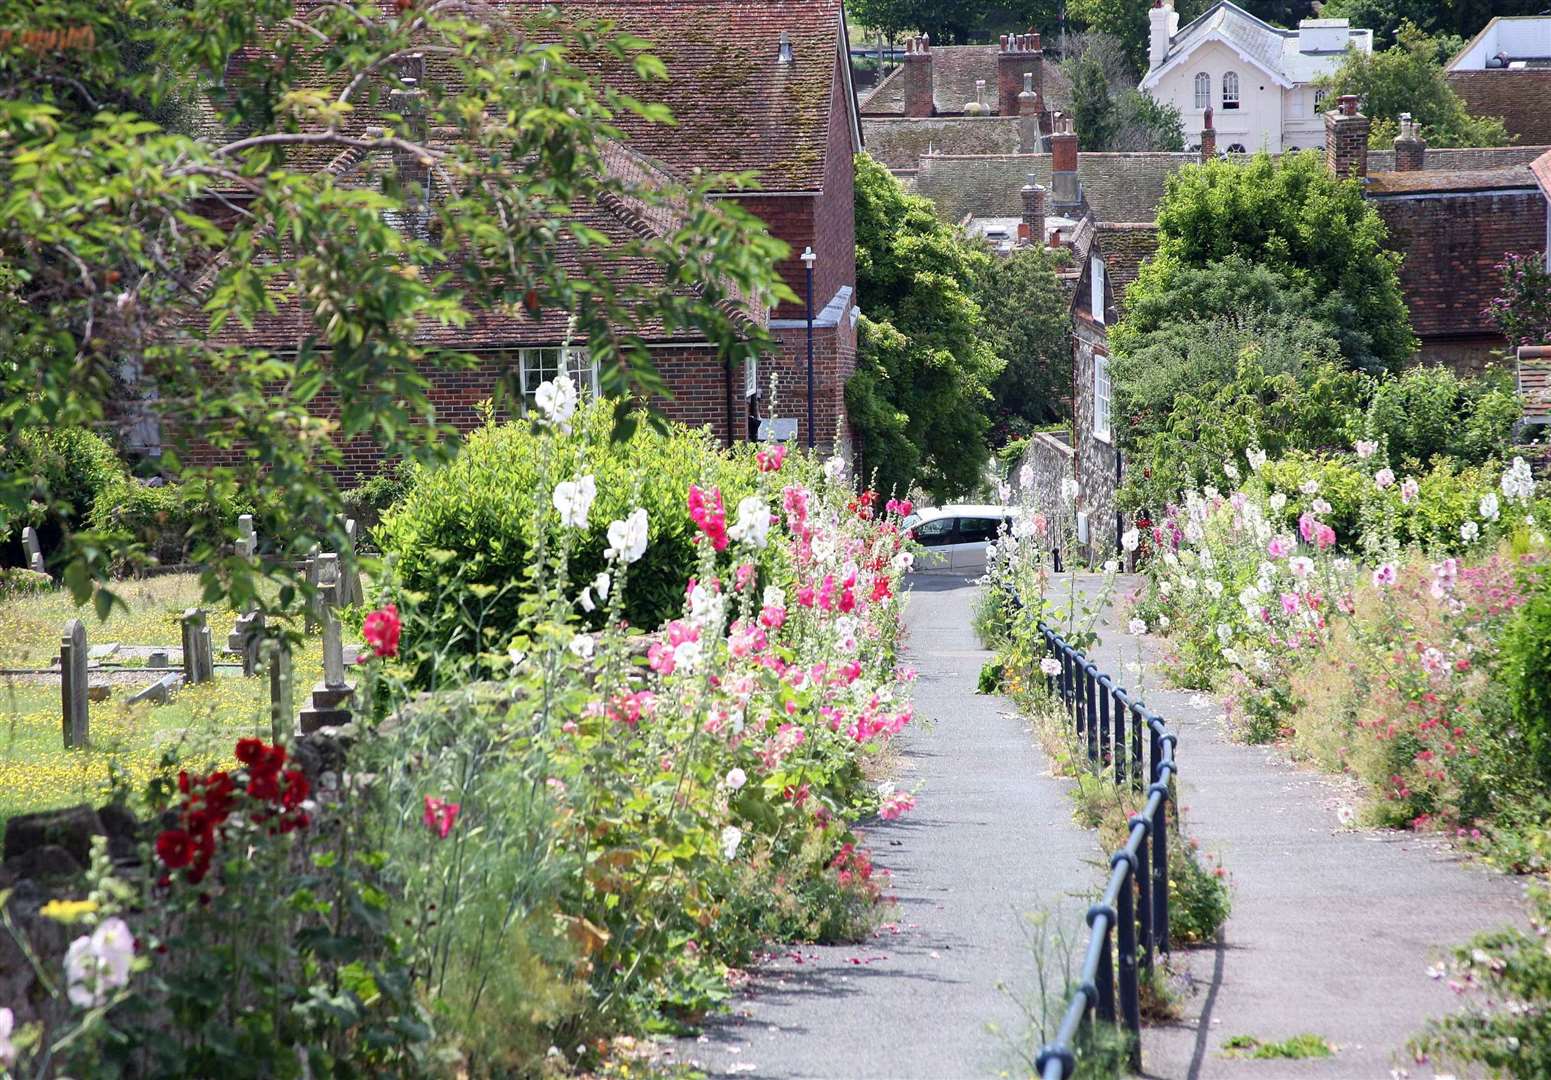 The hollyhocks line Church Hill in Hythe, brightening up the path